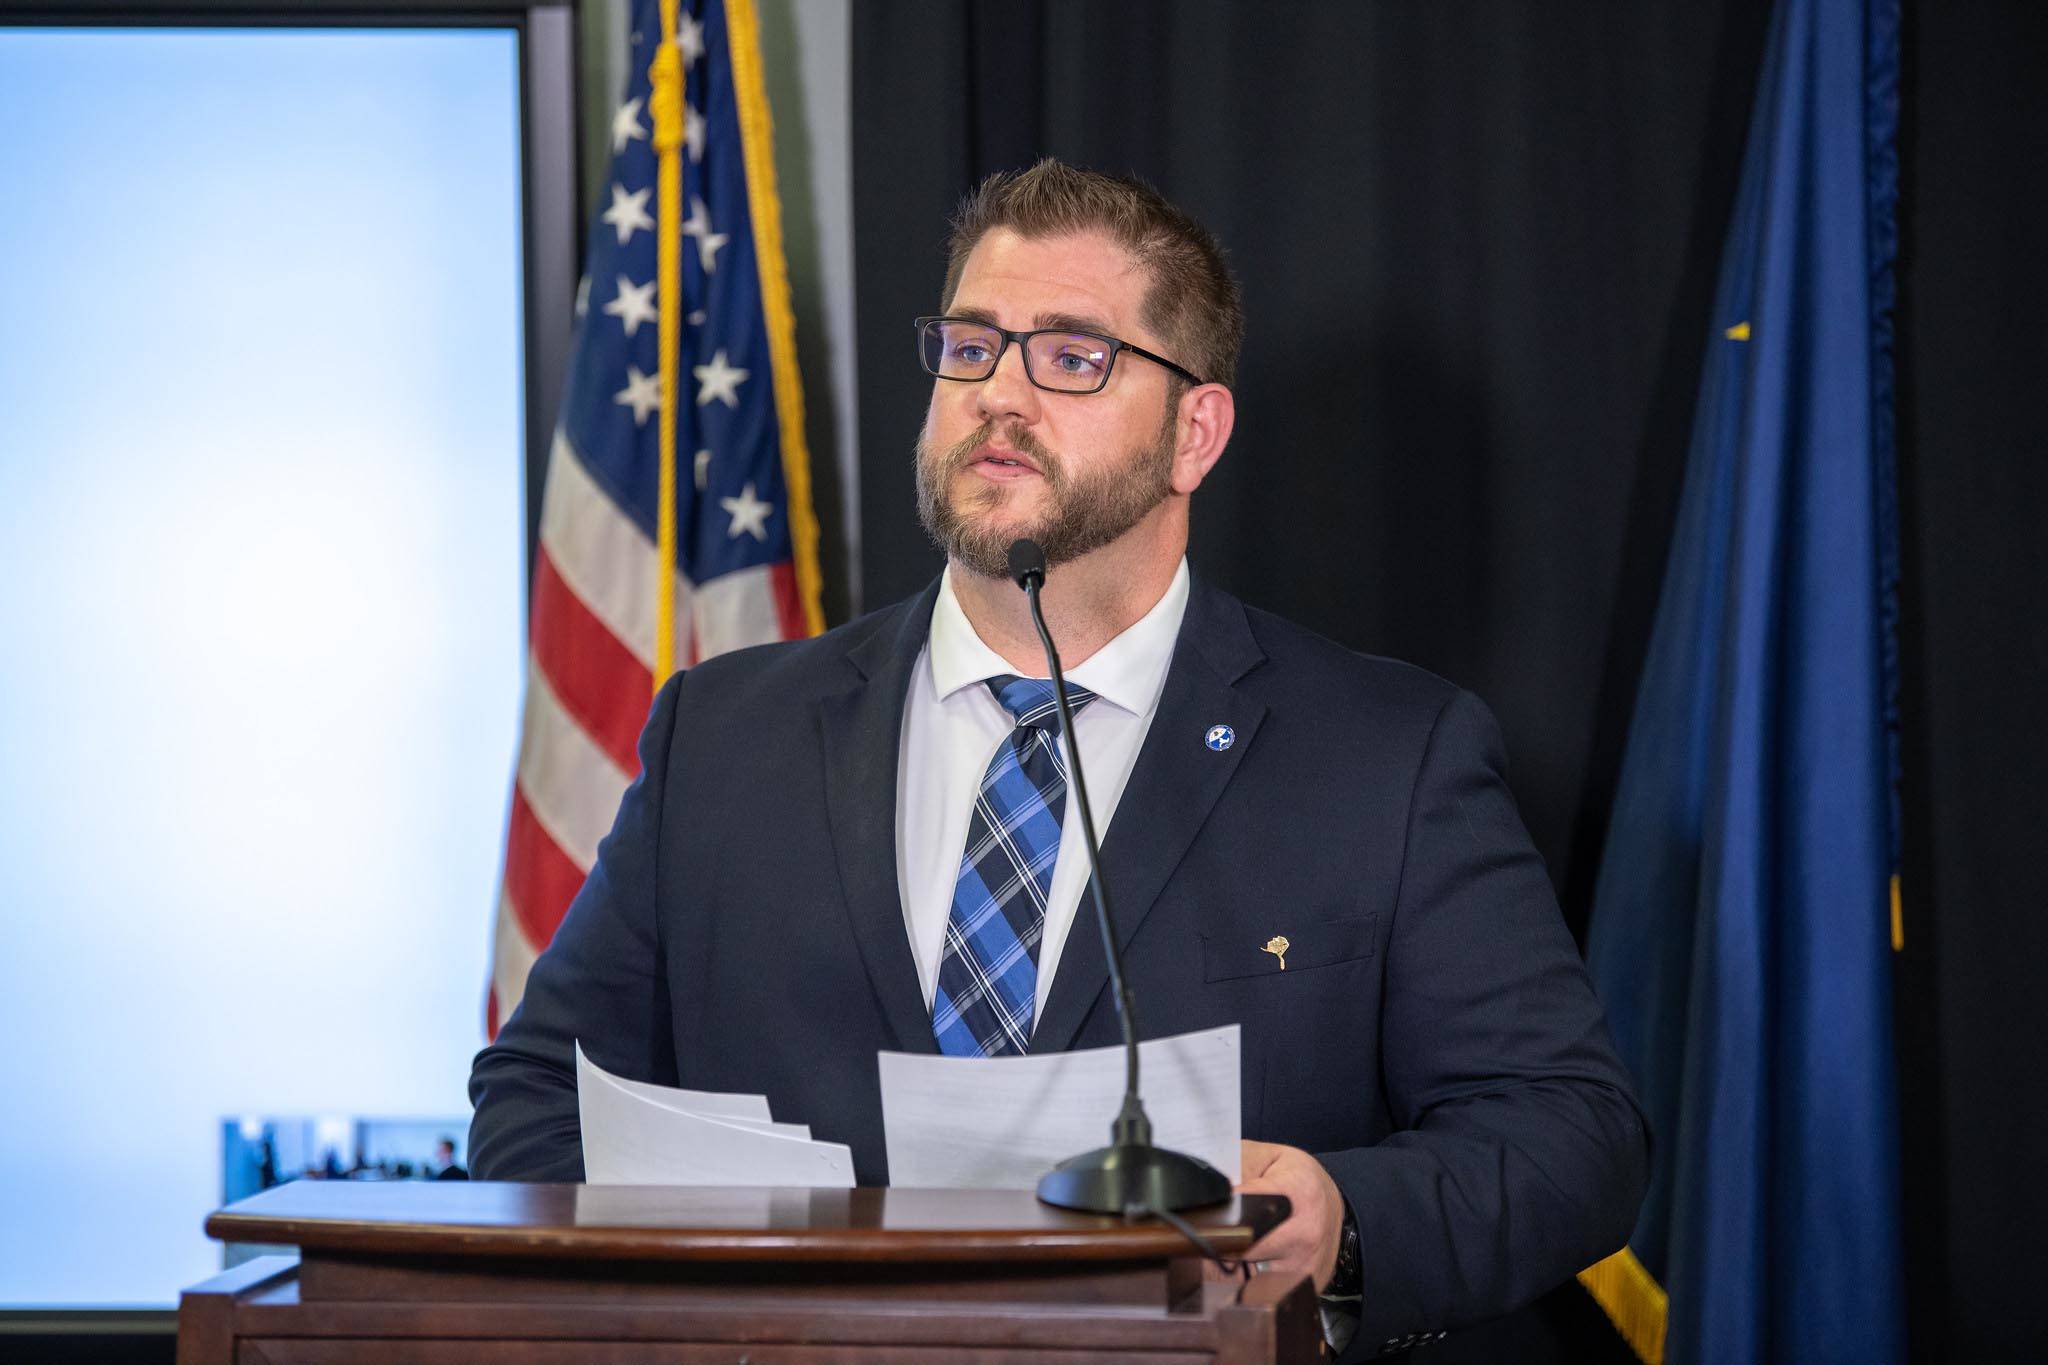 Department of Health and Social Services Commissioner Adam Crum presents at a press conference addressing the extension of two mandates issued by Gov. Mike Dunleavy in response to the spread of COVID-19, on Wednesday, April 1, 2020 in Anchorage, Alaska. (Courtesy photo)